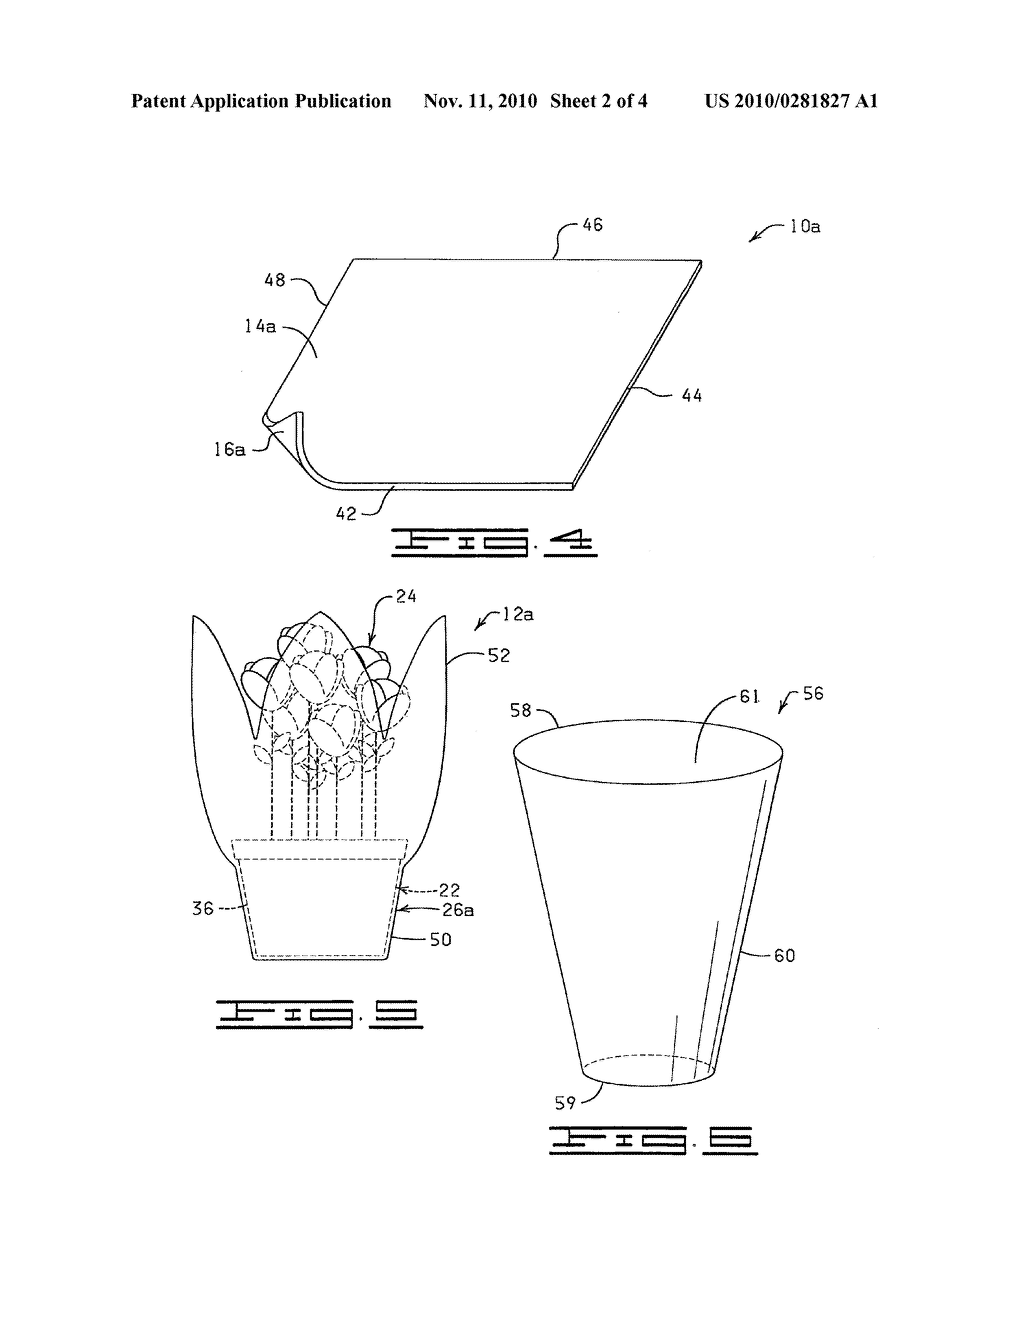 METHOD OF PROVIDING A DECORATIVE COVER FOR A FLOWER POT FORMED OF A HEAT SHRINKABLE MATERIAL - diagram, schematic, and image 03